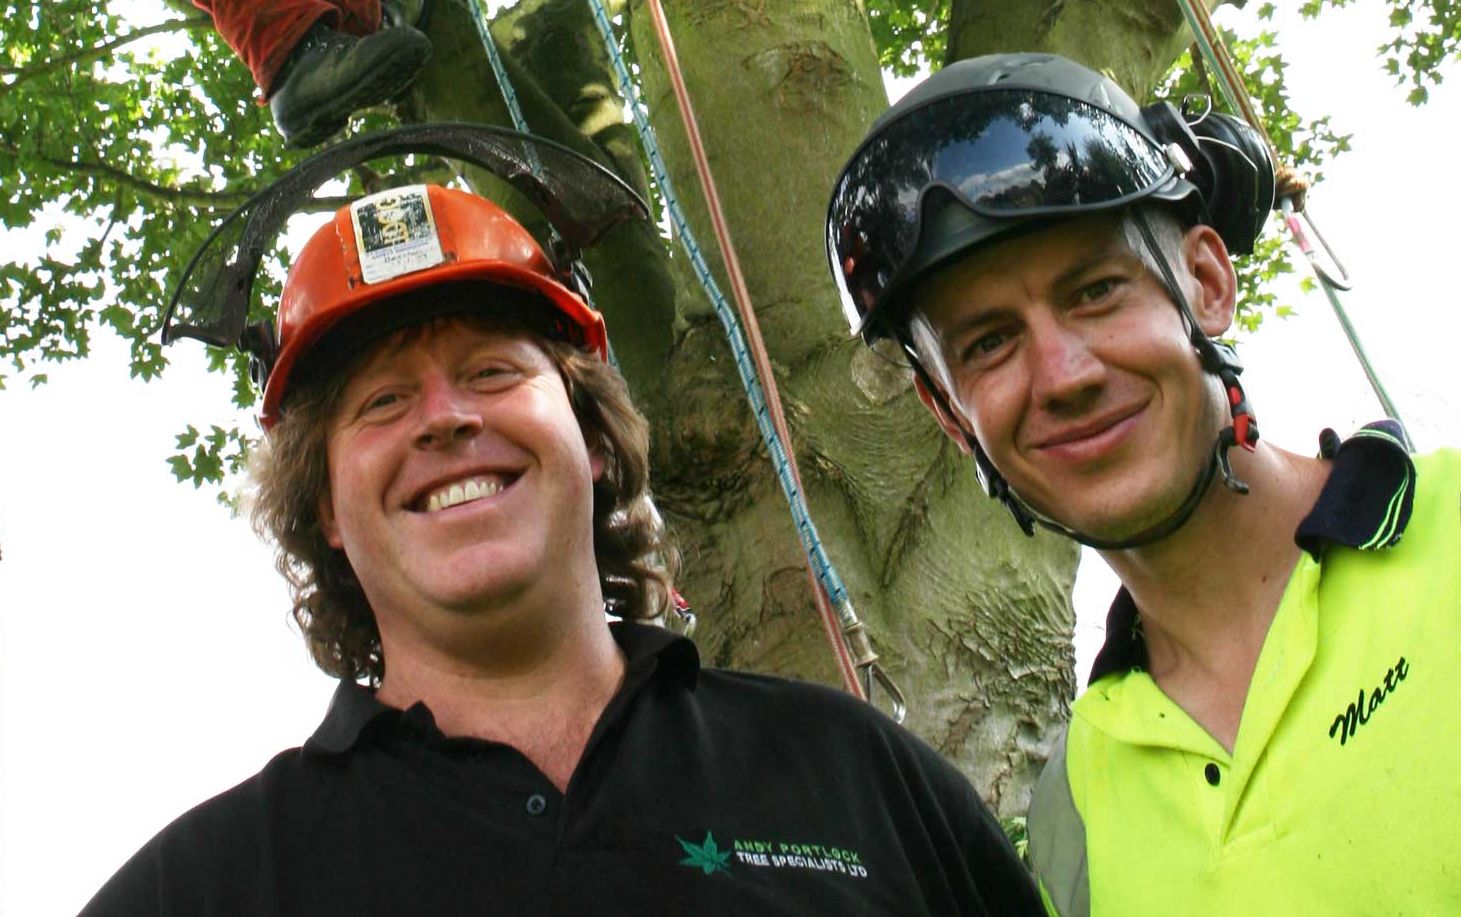 Two team members at Andy Portlock Tree Specialists Ltd